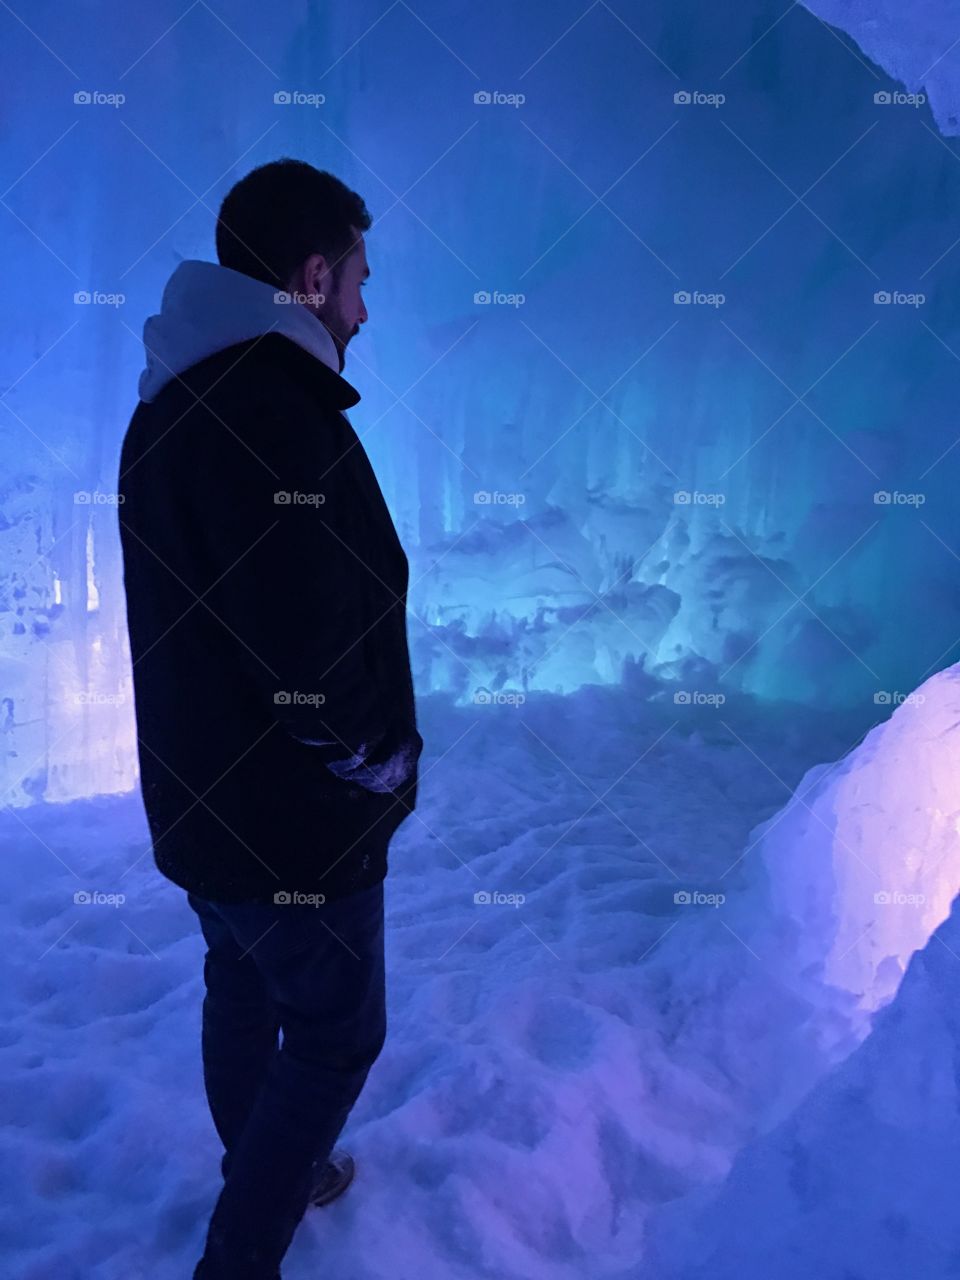 Beautiful ice castles and a handsome guy to go with it 